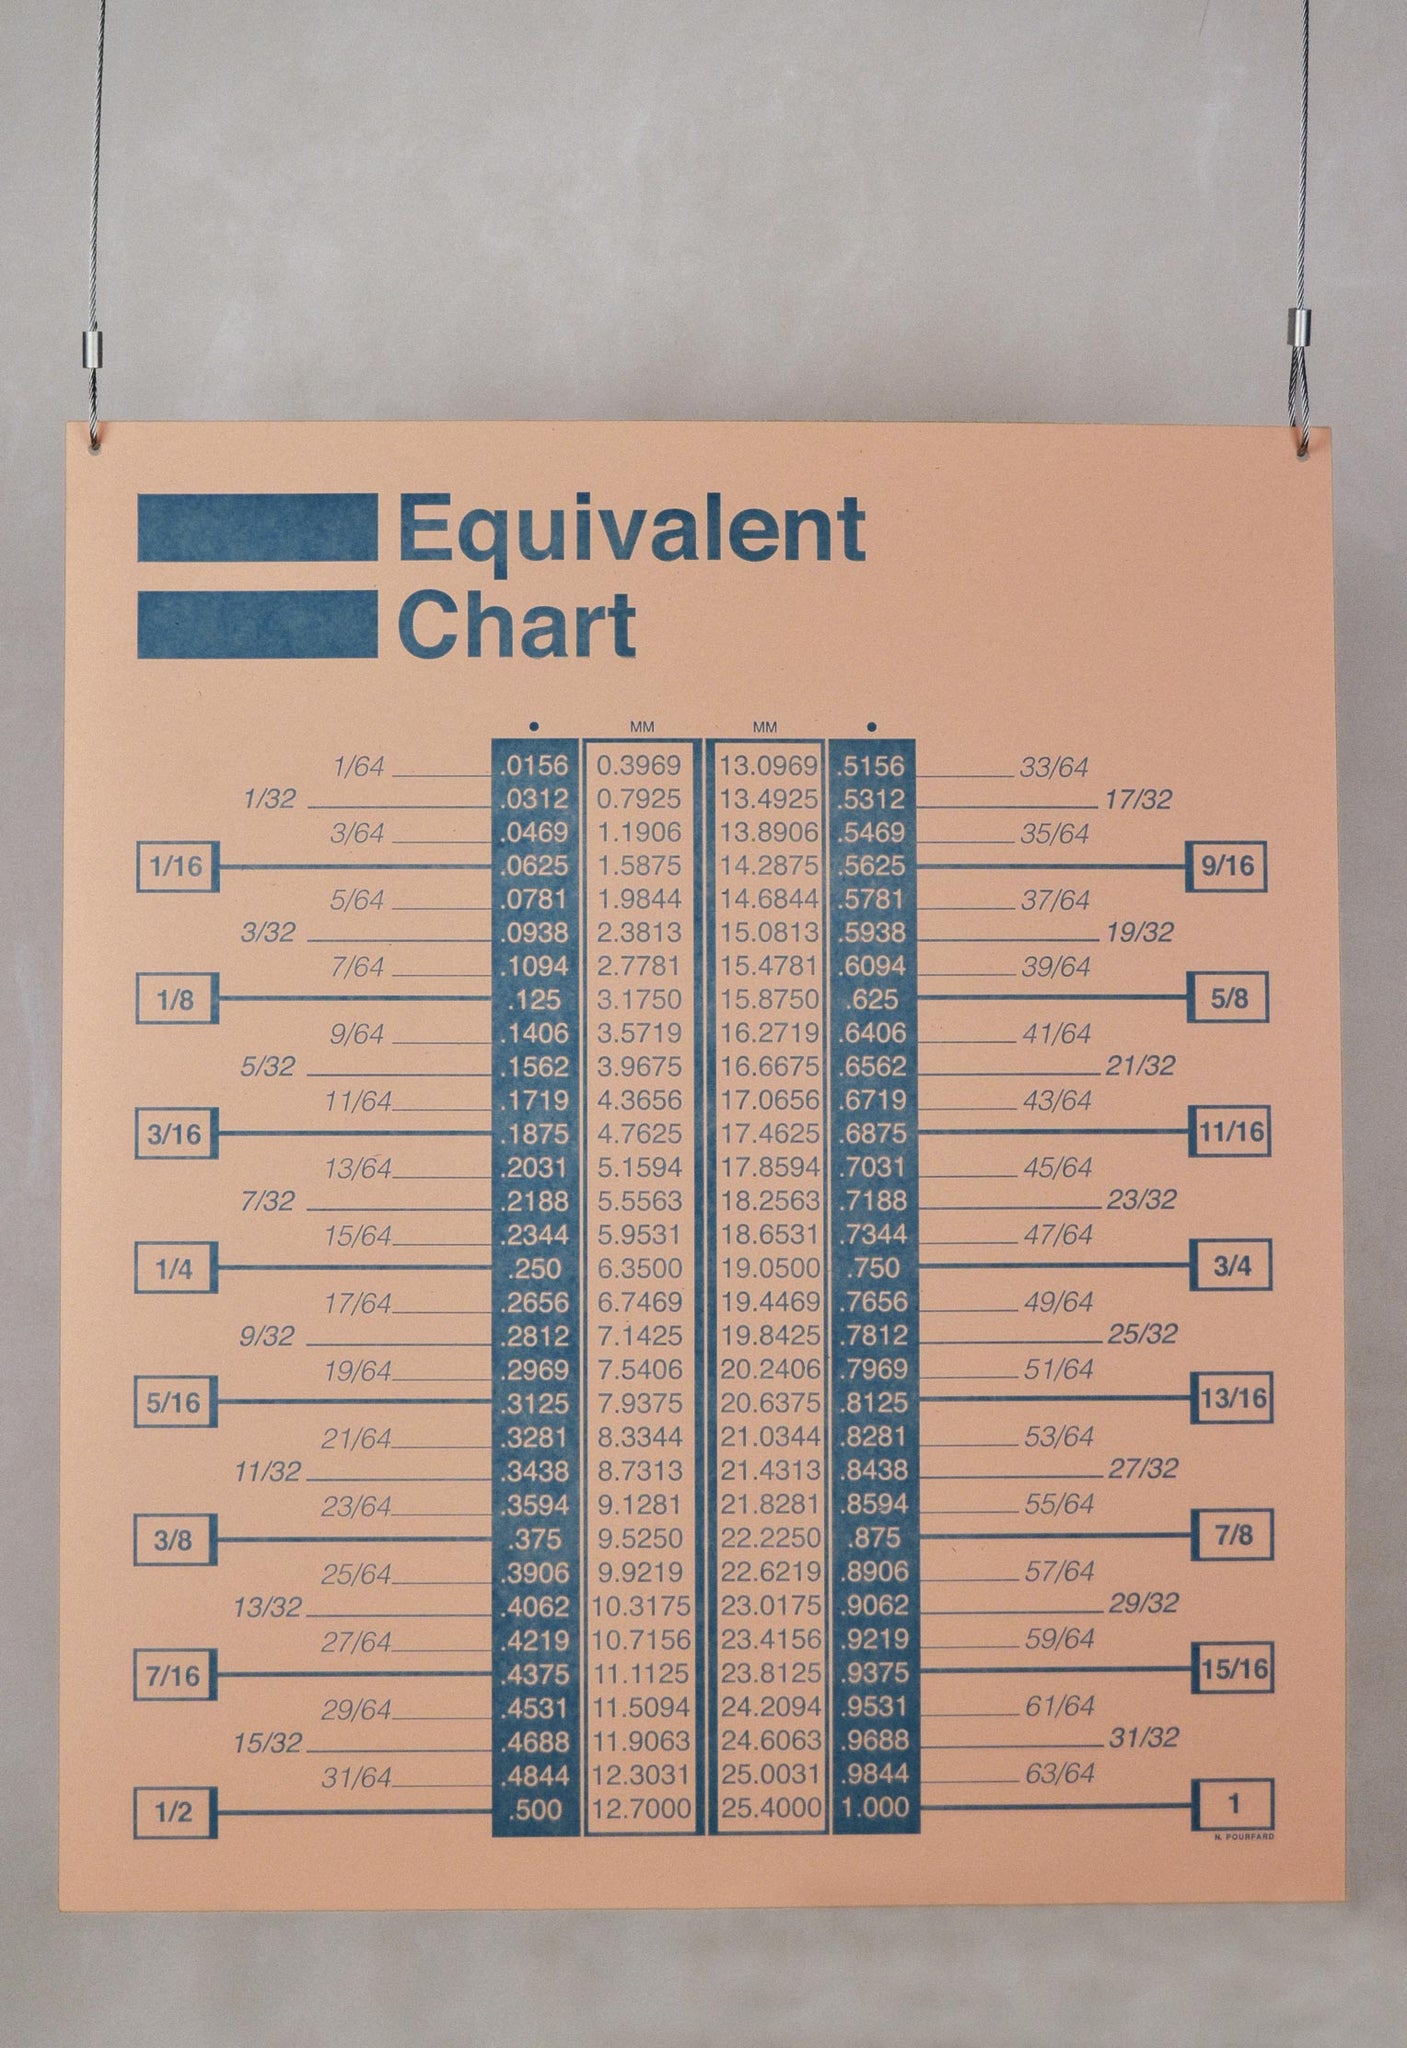 Information Chart: Equivalent Chart displaying a unit conversion table